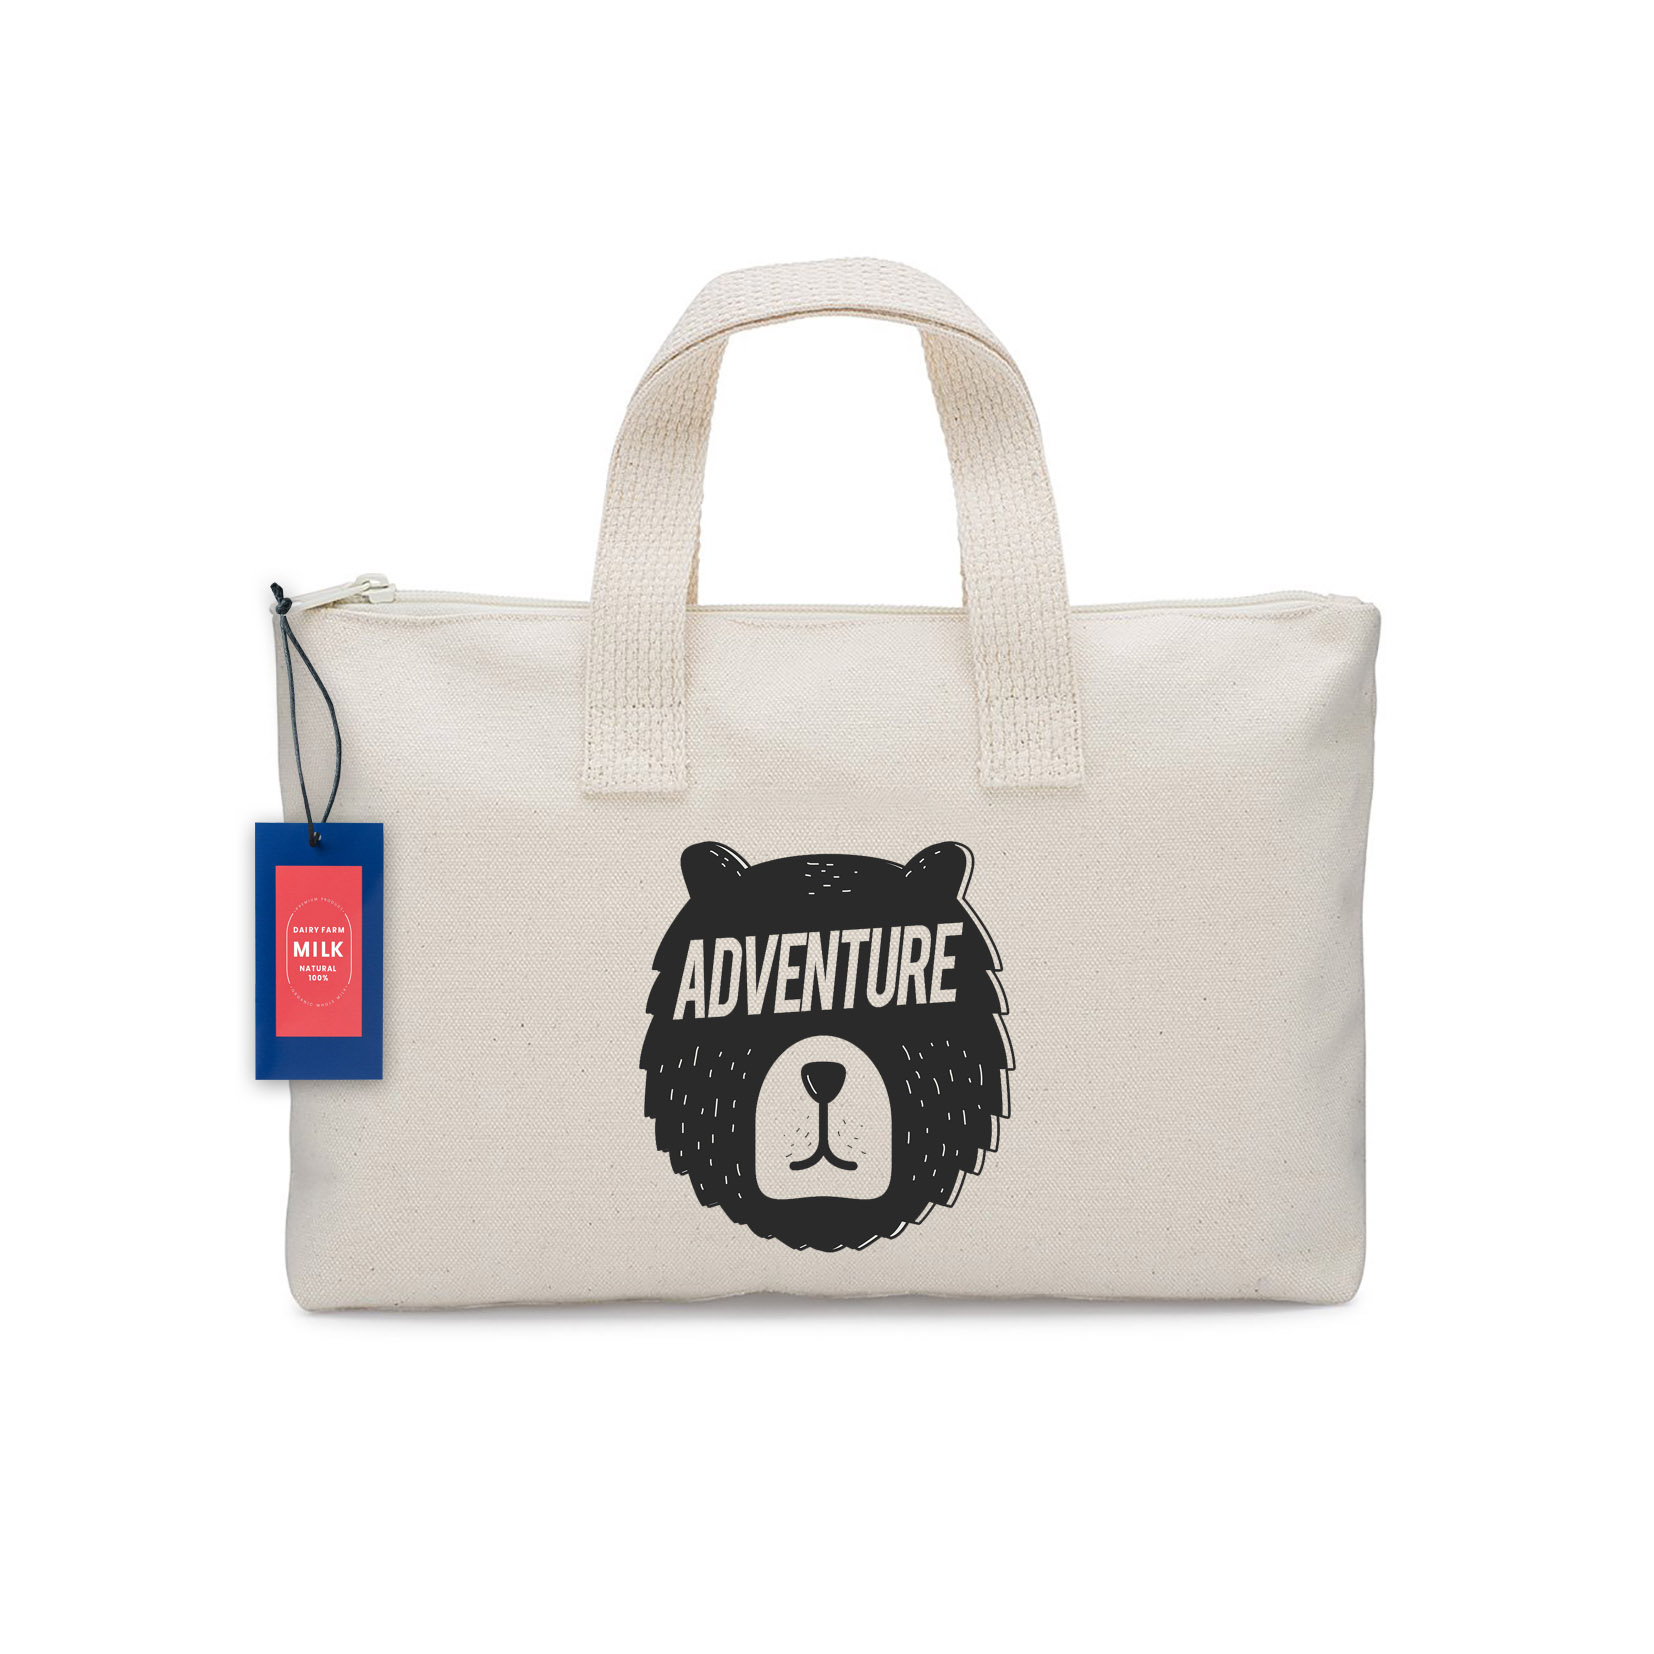 Personalized Canvas Zip Tote Bag